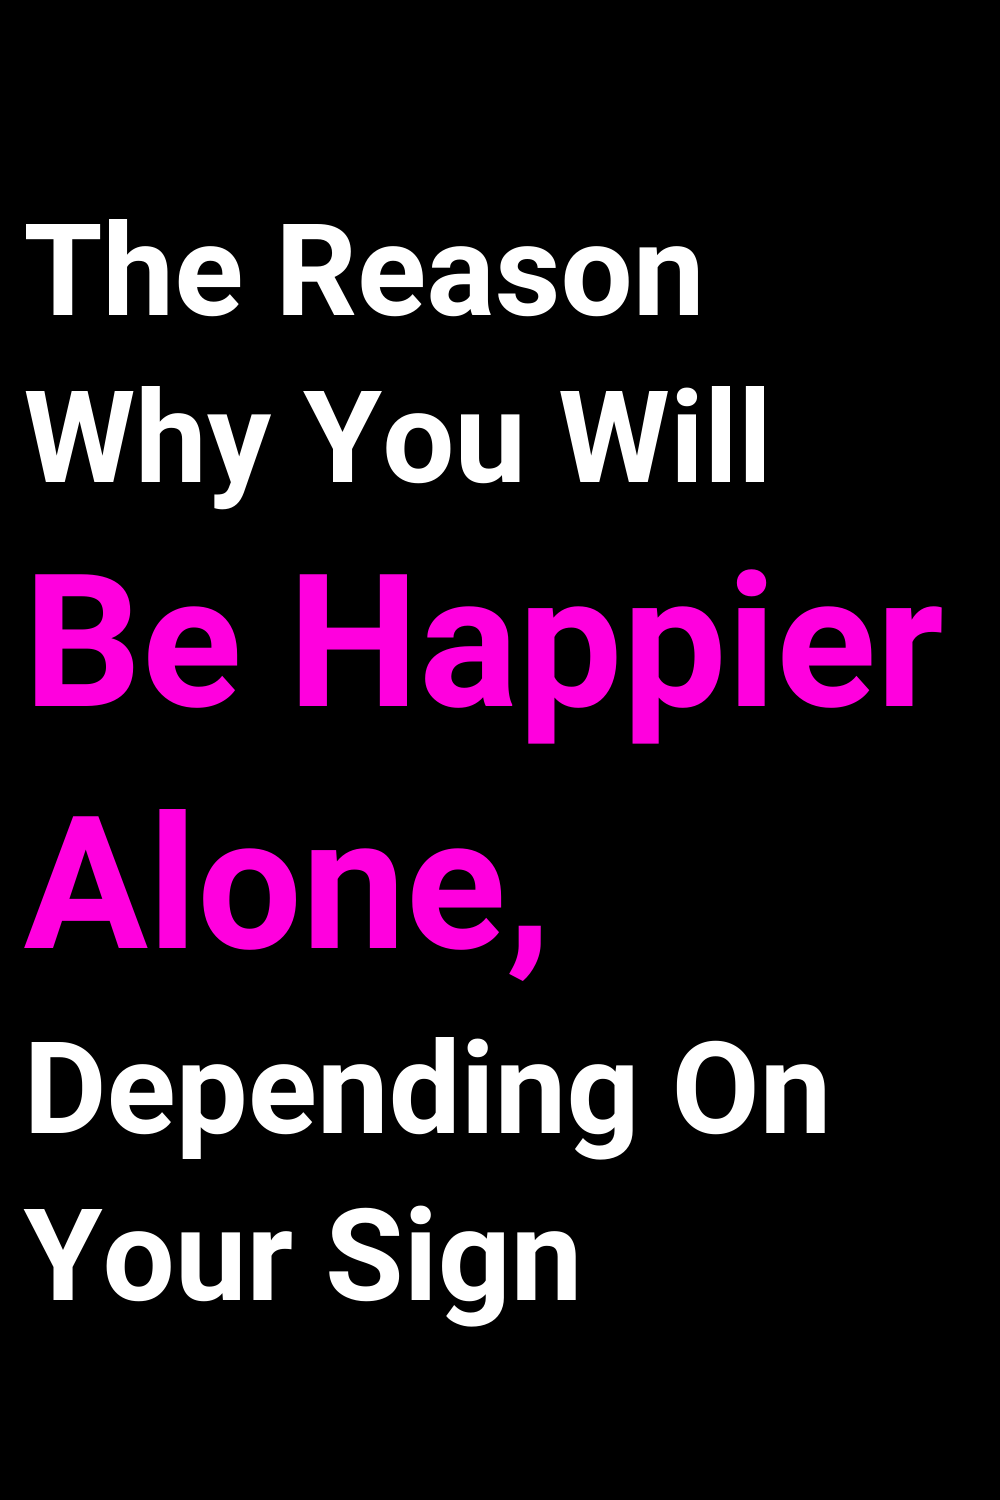 The Reason Why You Will Be Happier Alone, Depending On Your Sign